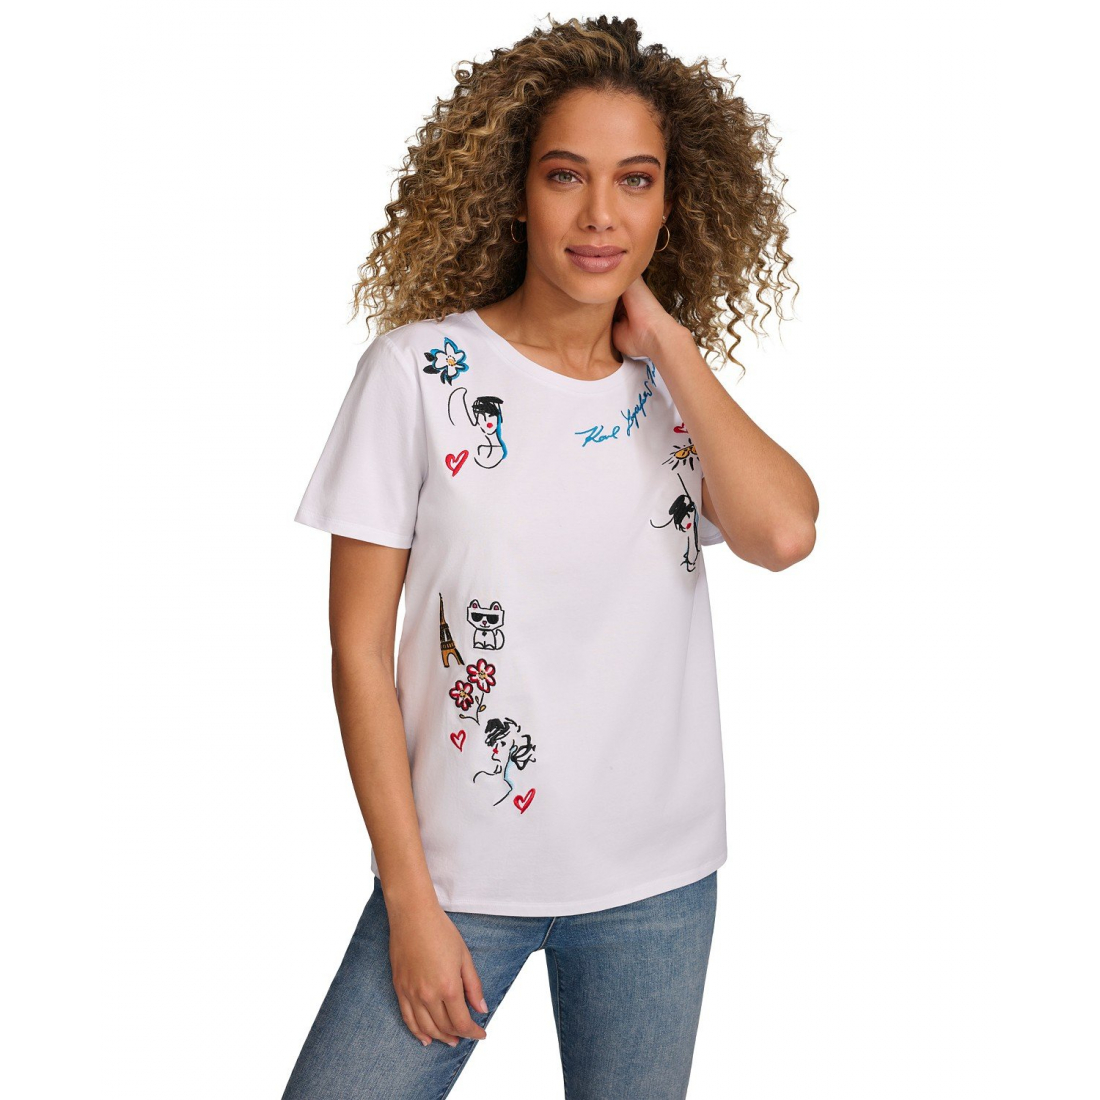 Women's 'Embroidered' T-Shirt